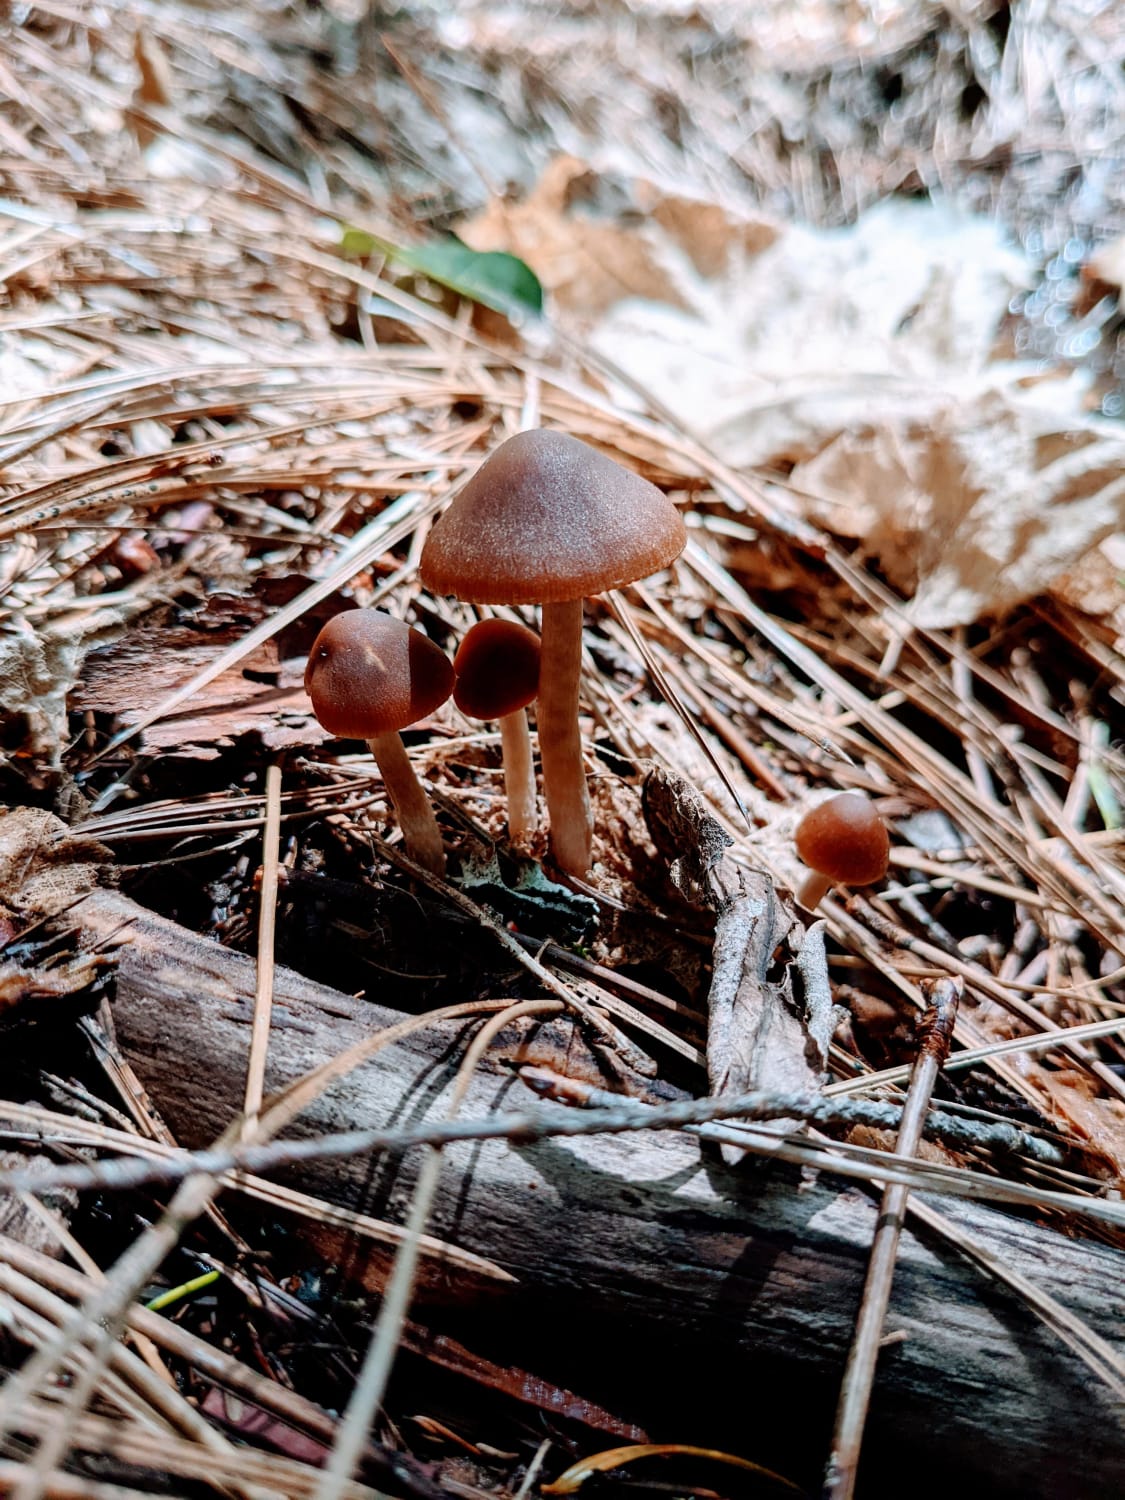 I found these beautiful little things near Lake Selmac in Oregon. Not too sure what they are though.